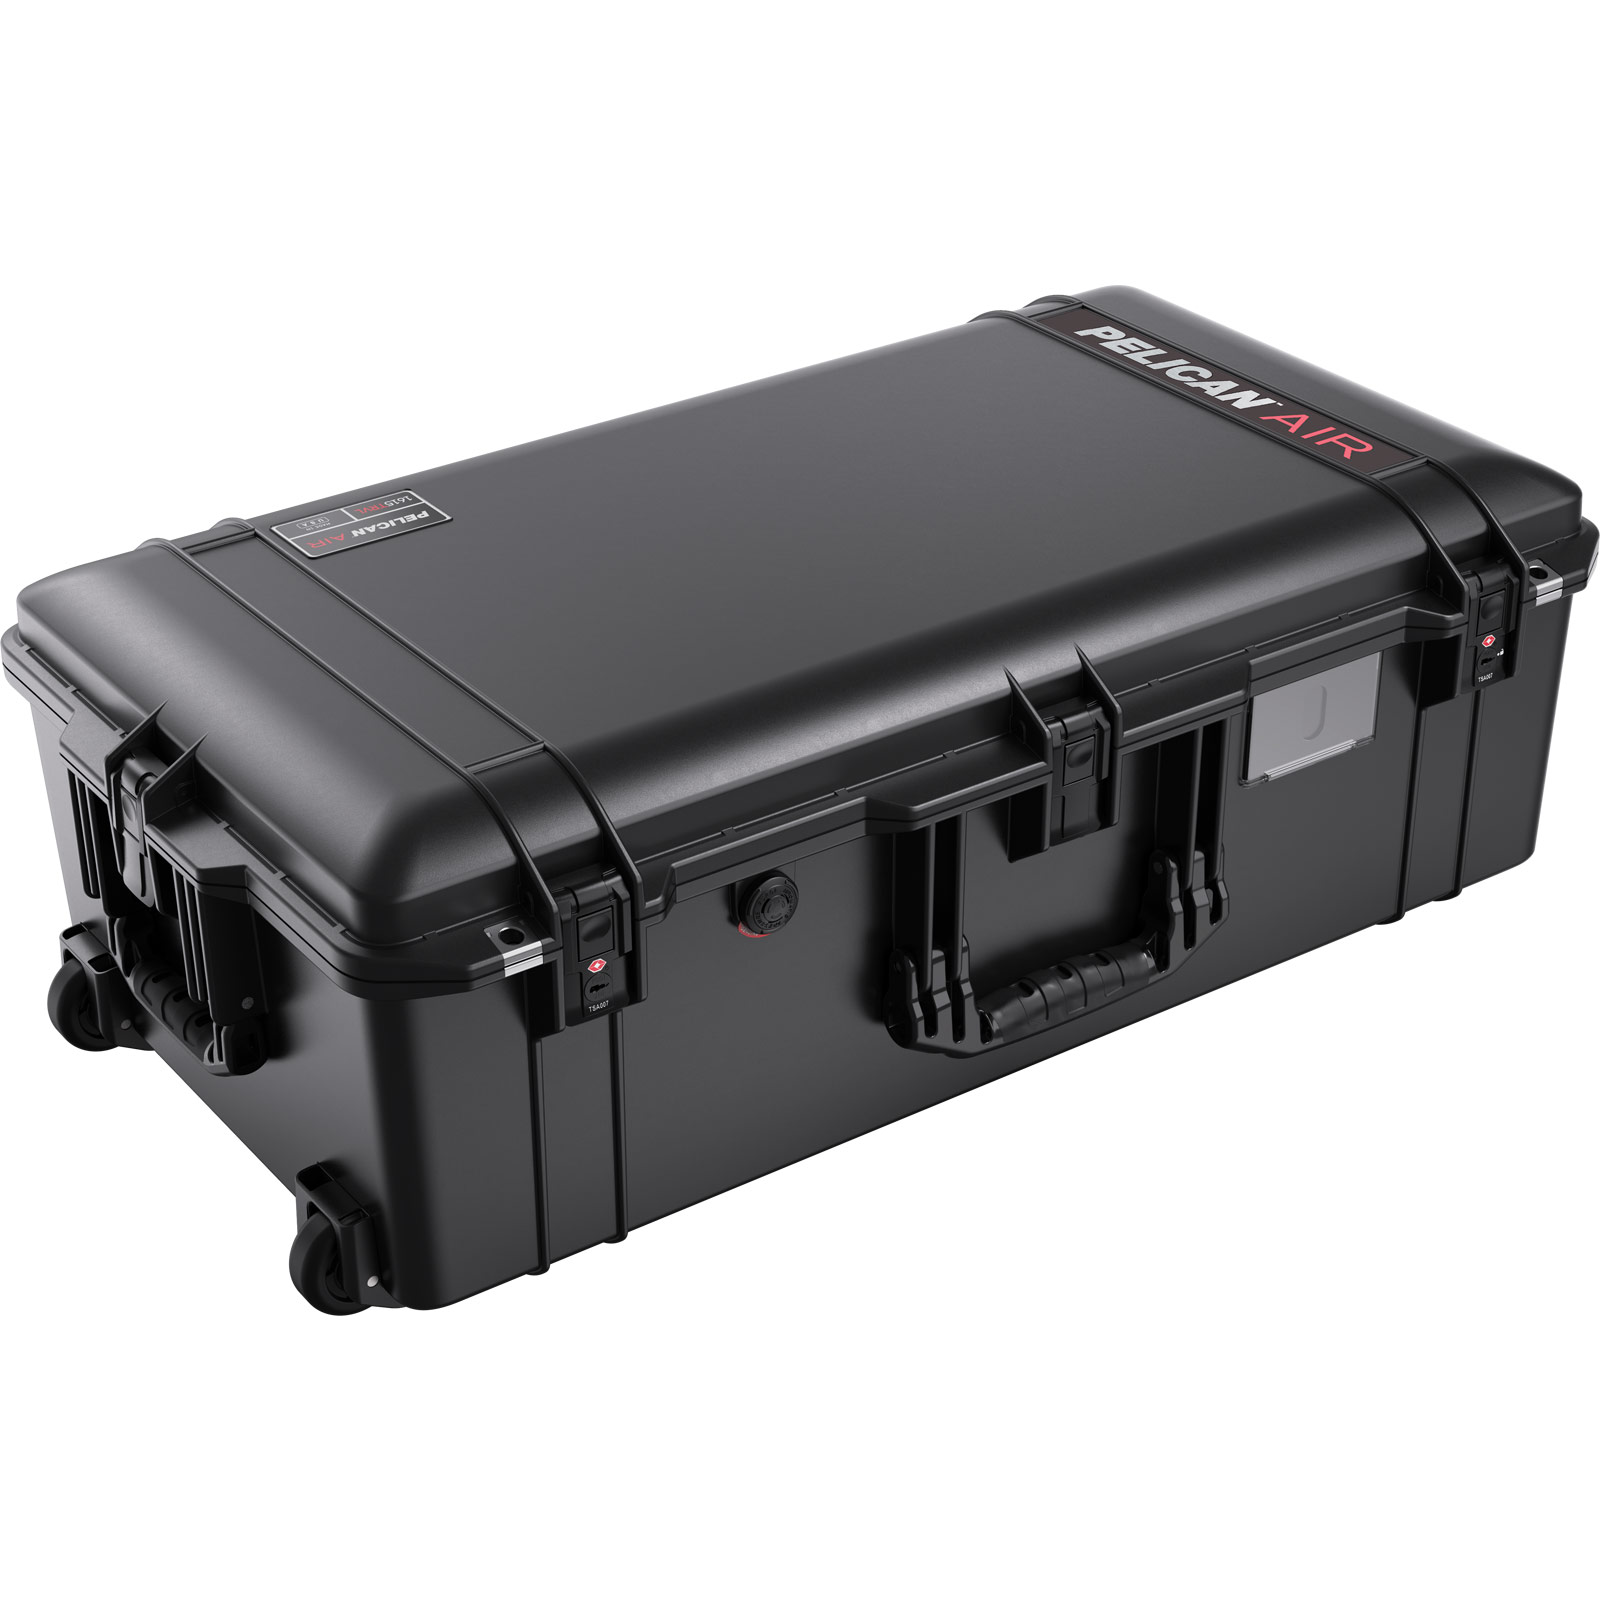 Pelican 1615TRVL Air Travel Case from Columbia Safety